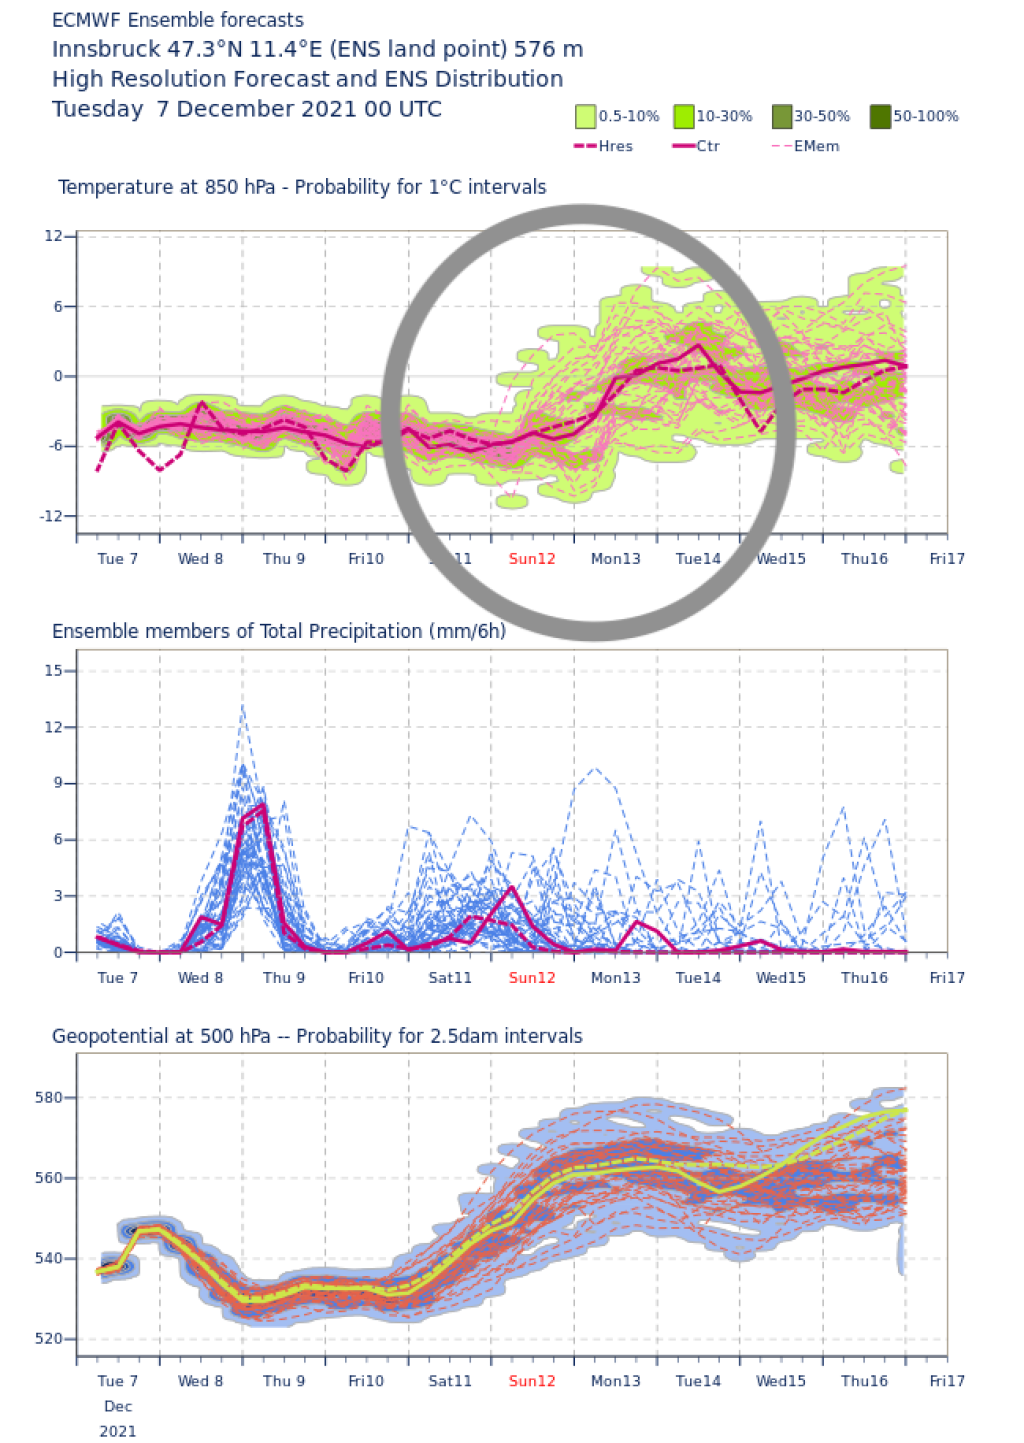 Ensemble forecast for grid point Innsbruck, warming and increase in geopotential clearly visible.